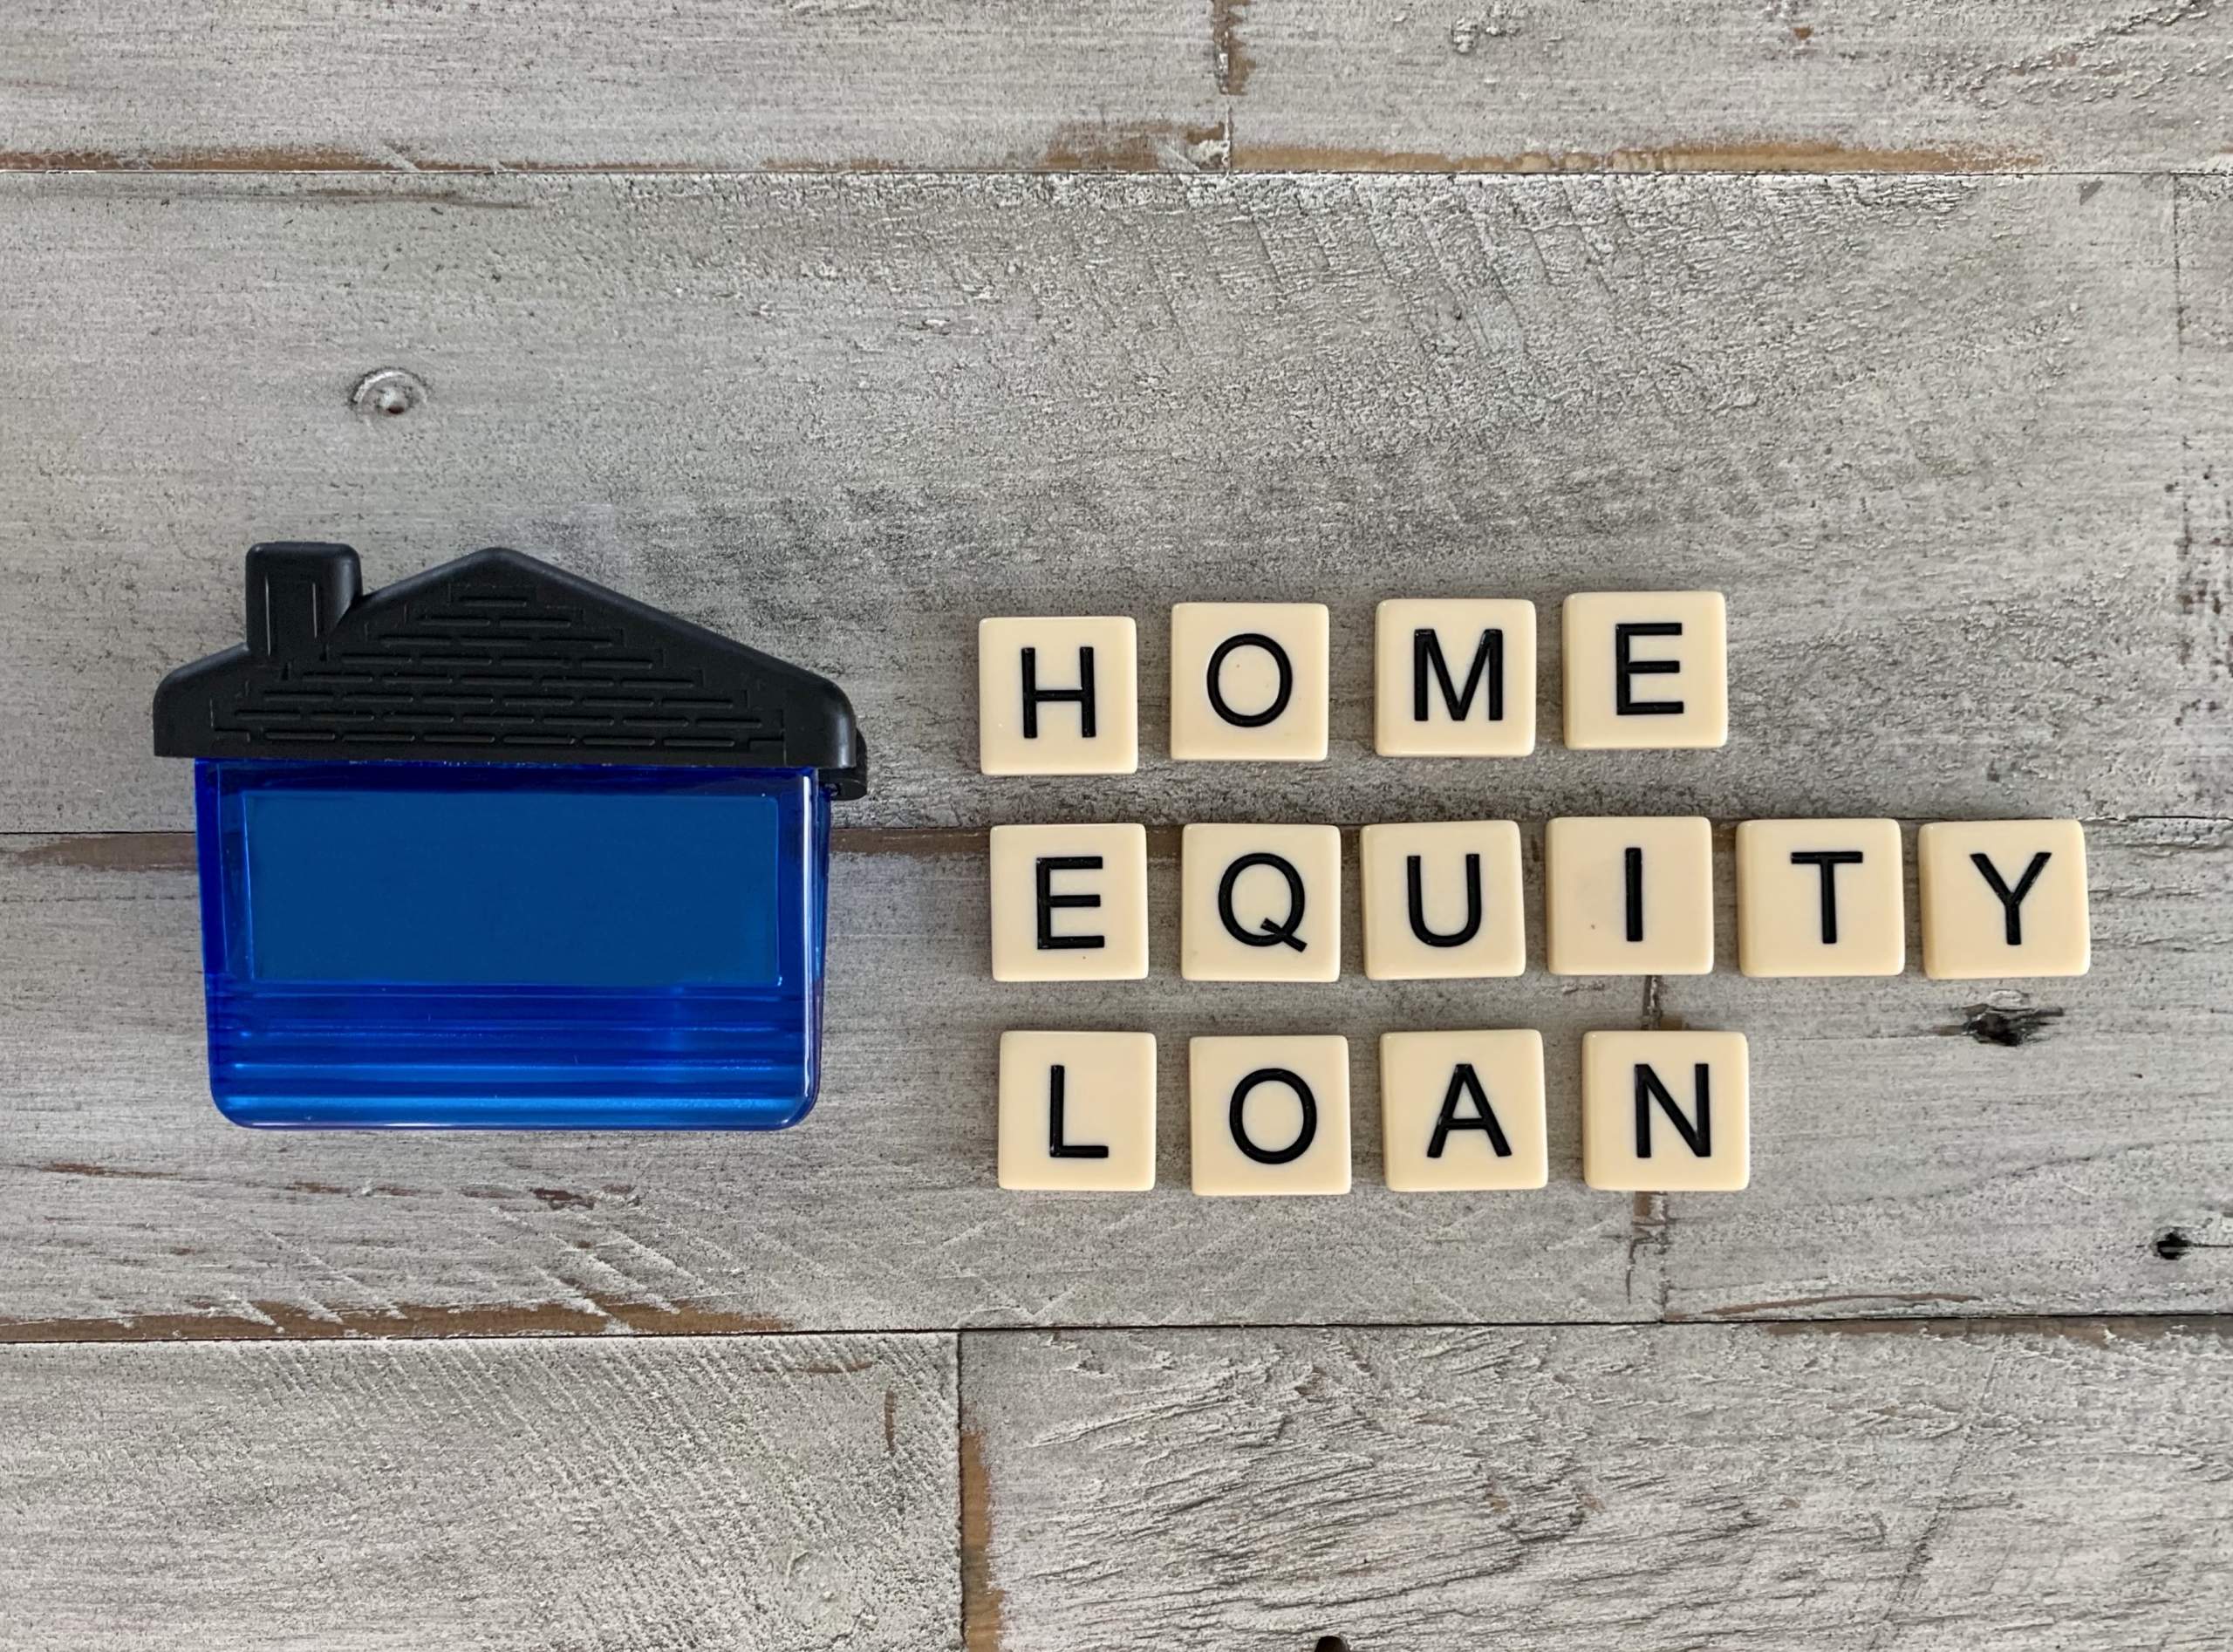 home equity loan guide